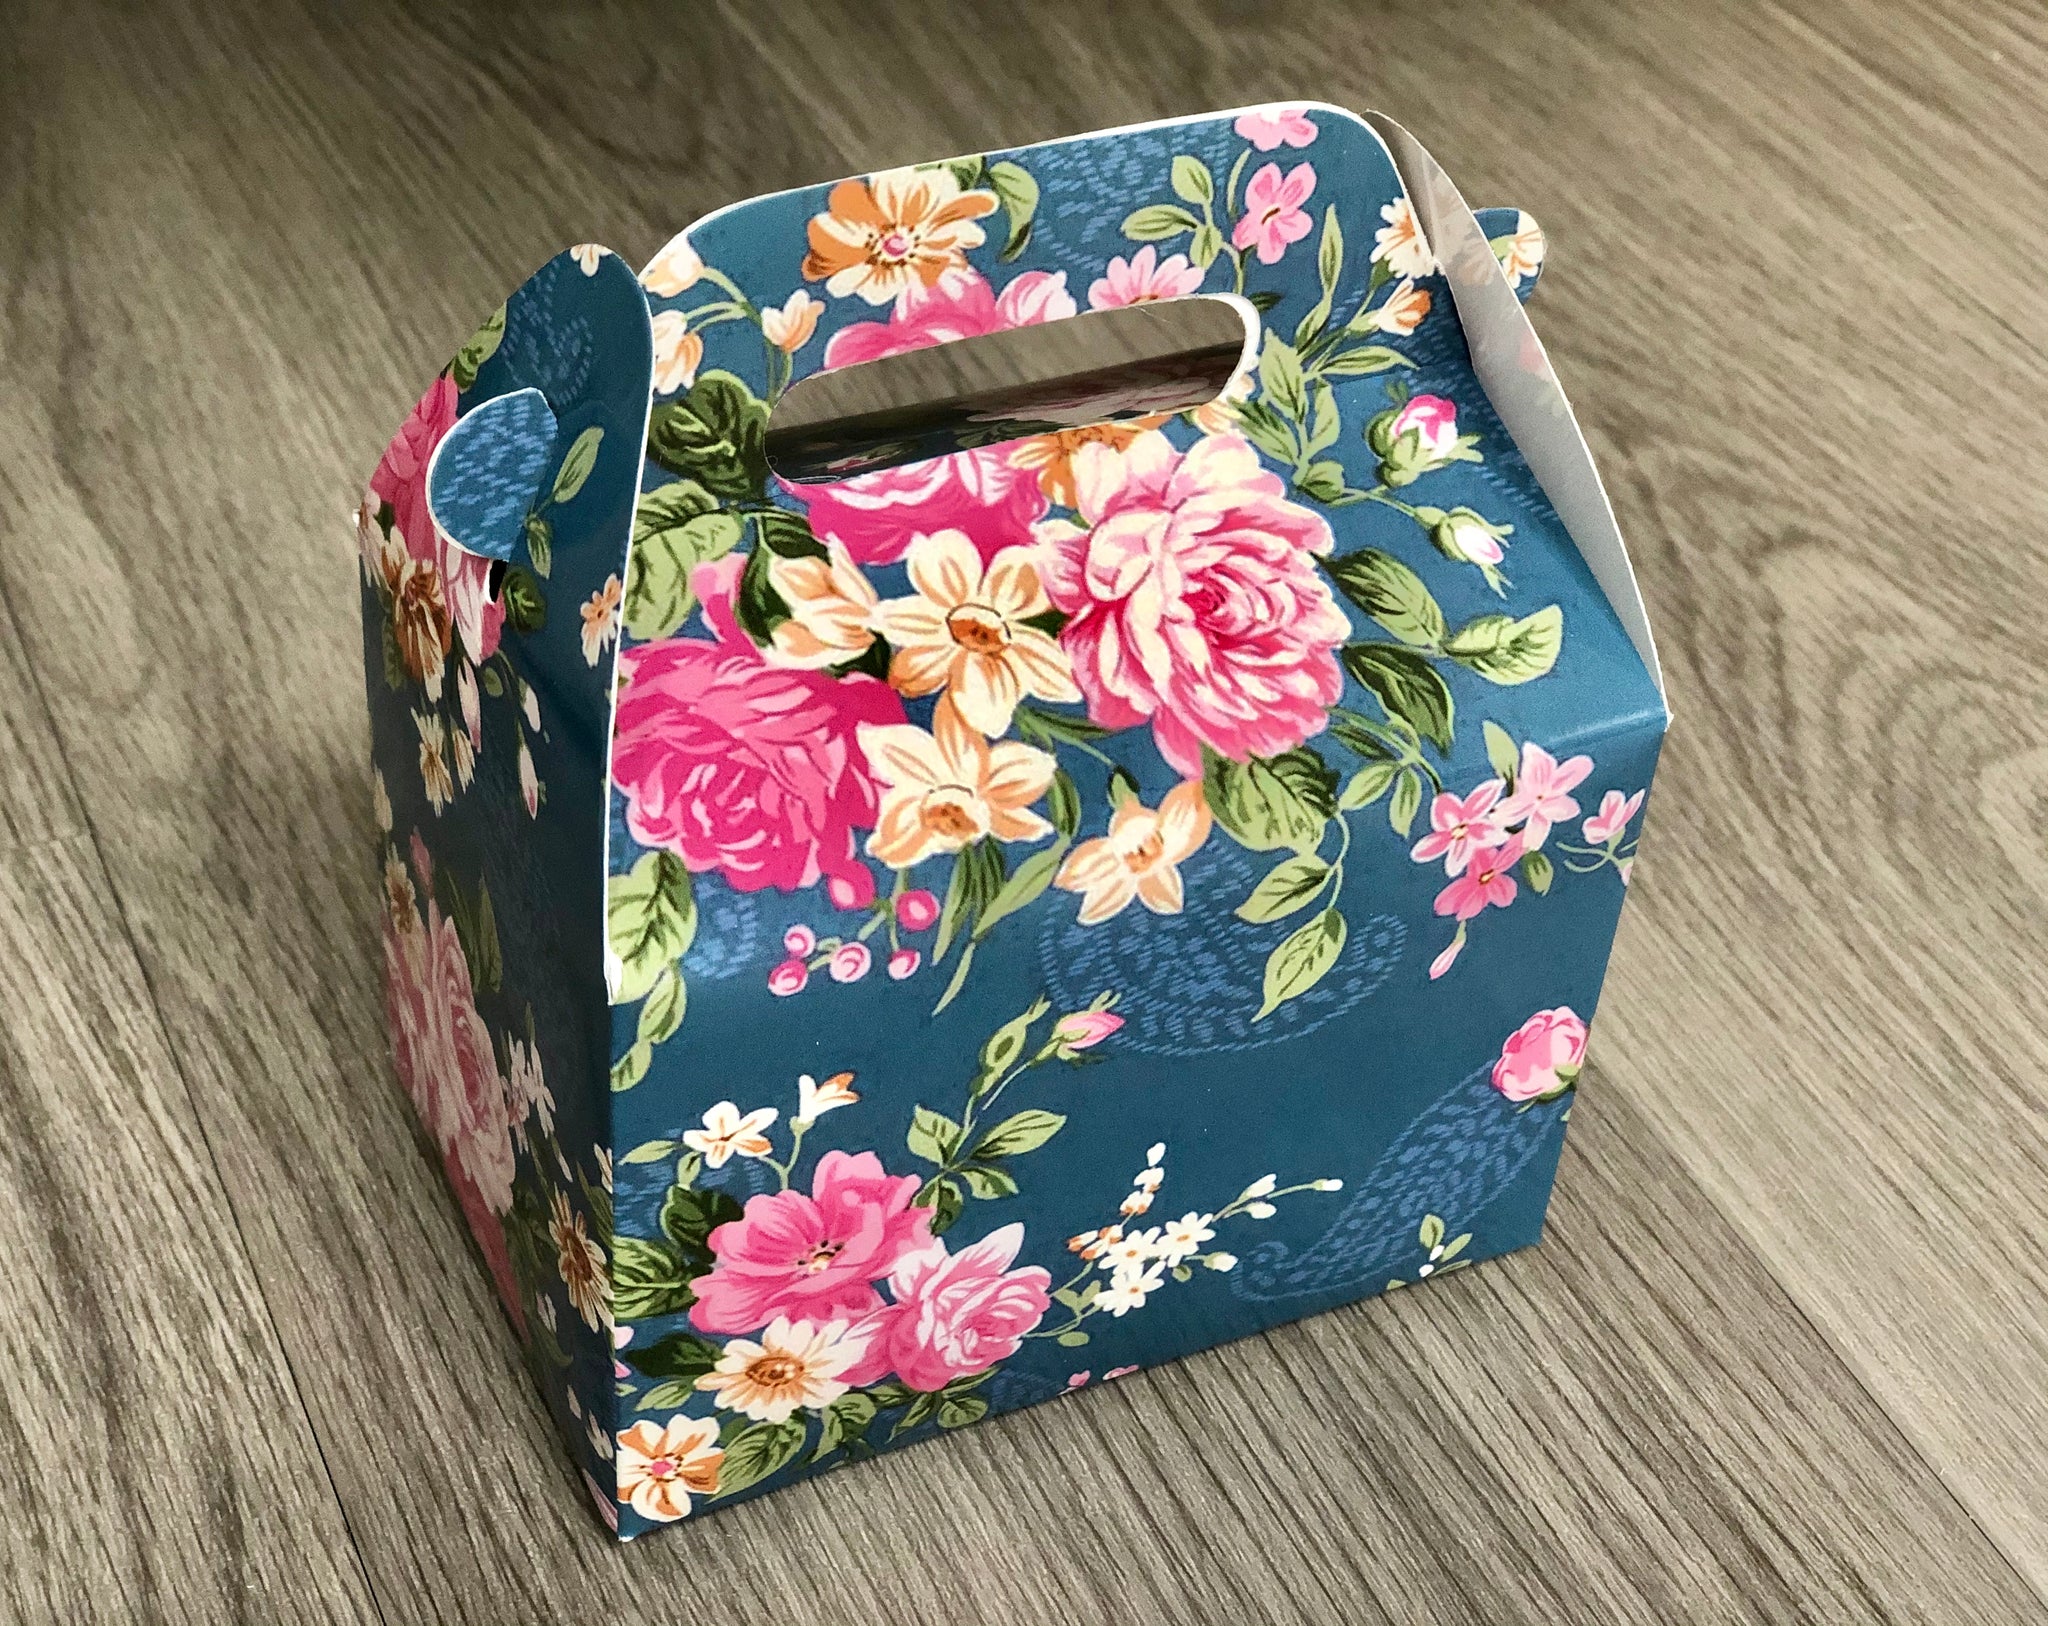 Floral Pattern Favor Boxes / Treat Boxes / Gift Boxes